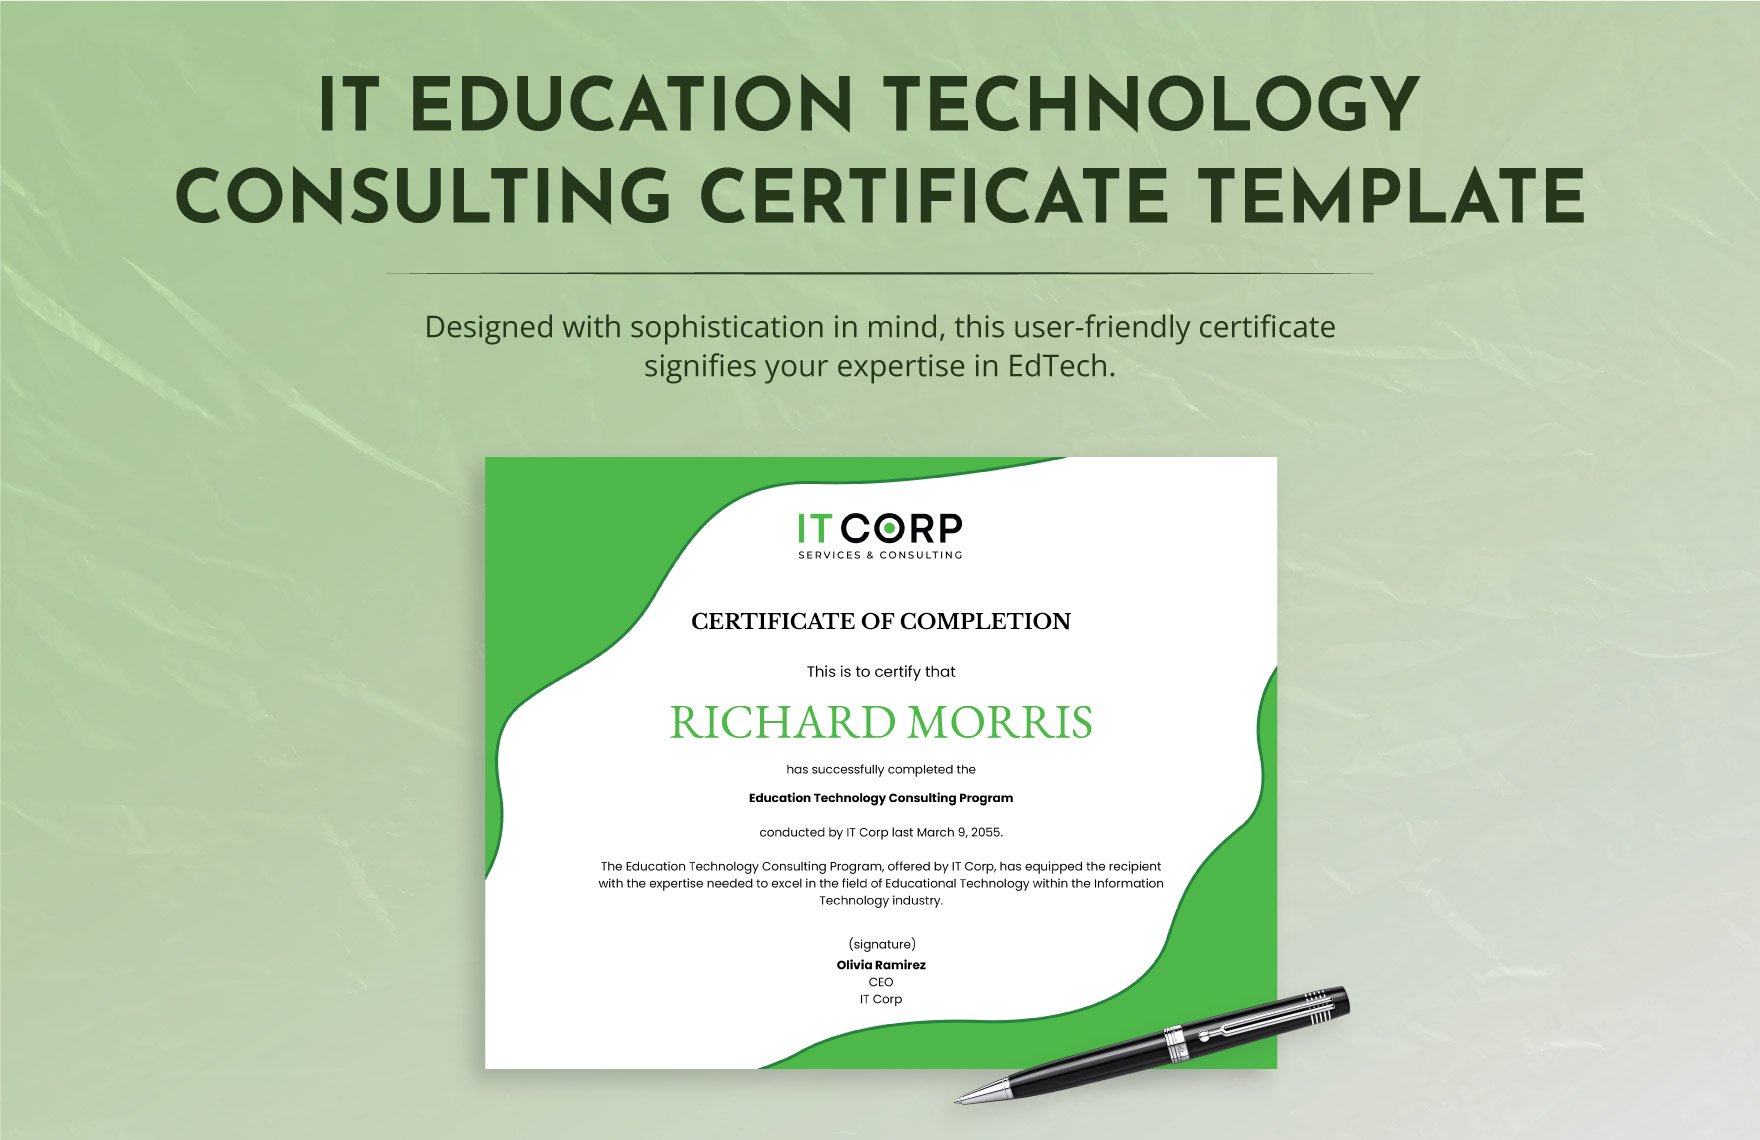 IT Education Technology Consulting Certificate Template